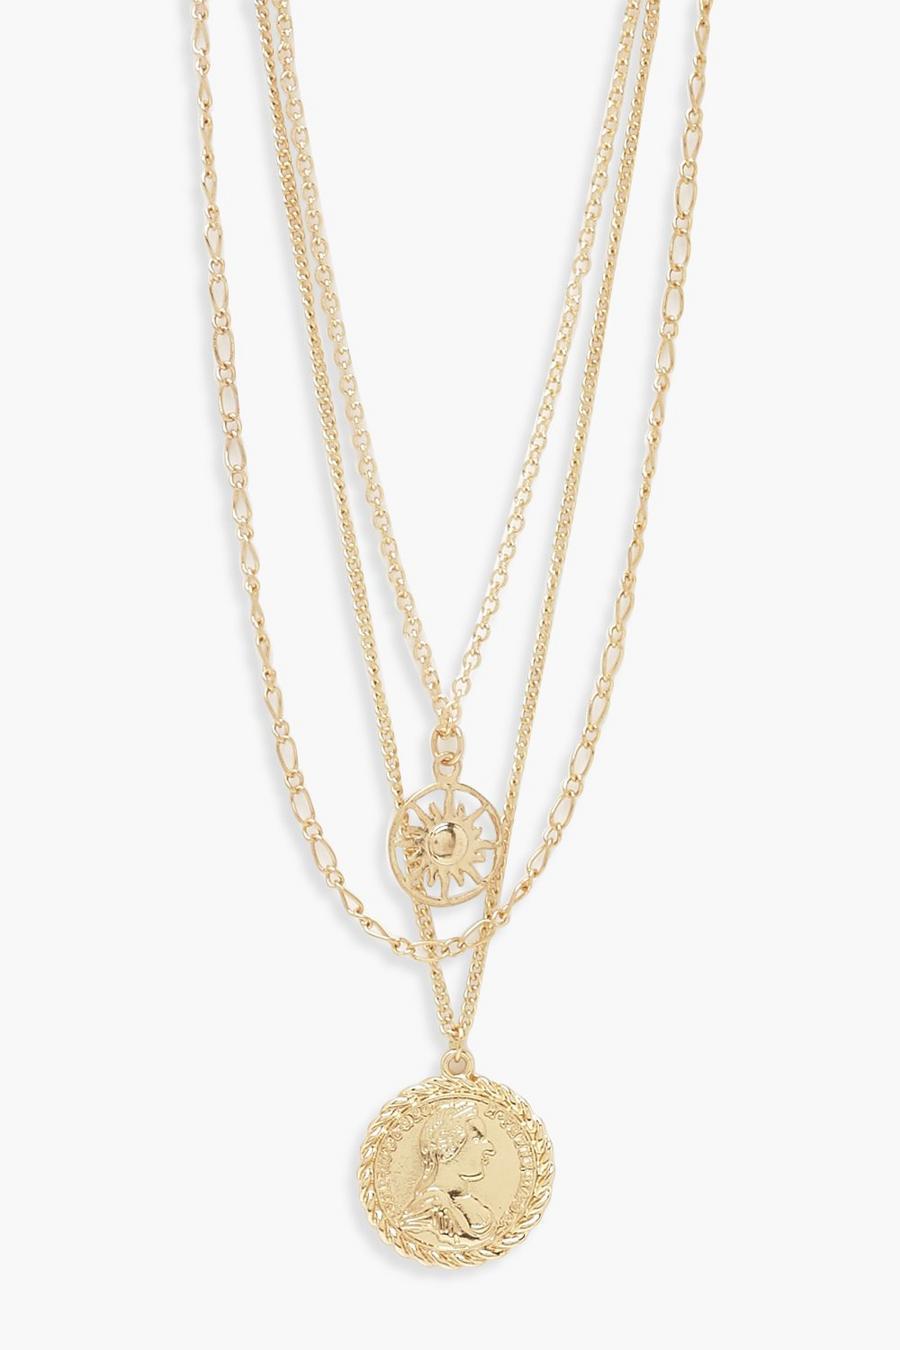 Gold metallic Chain & Coin Layered Necklace